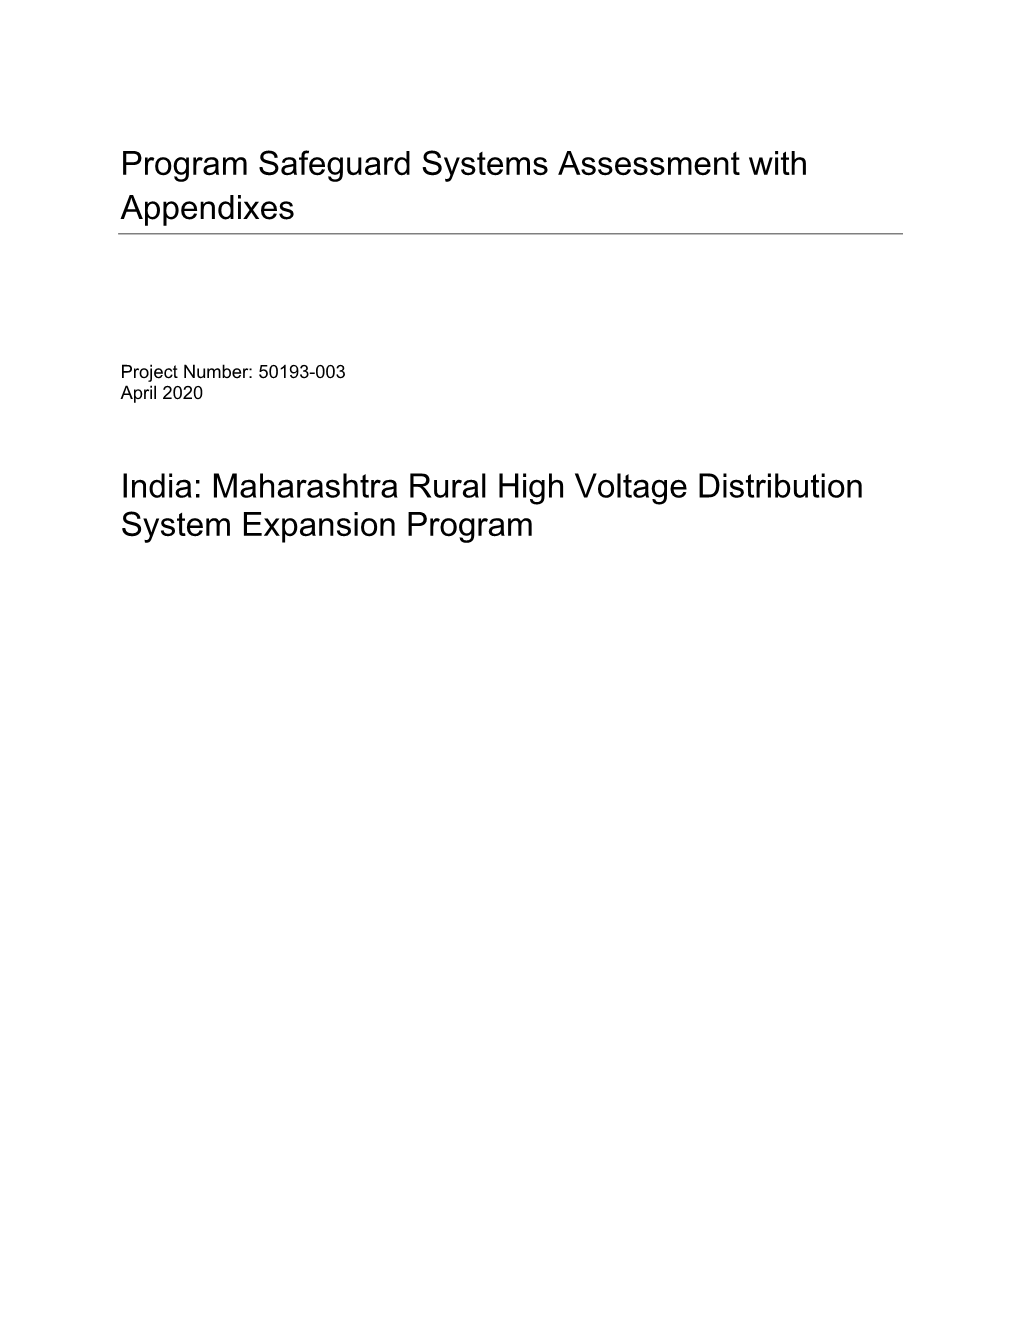 Program Safeguard Systems Assessment with Appendixes